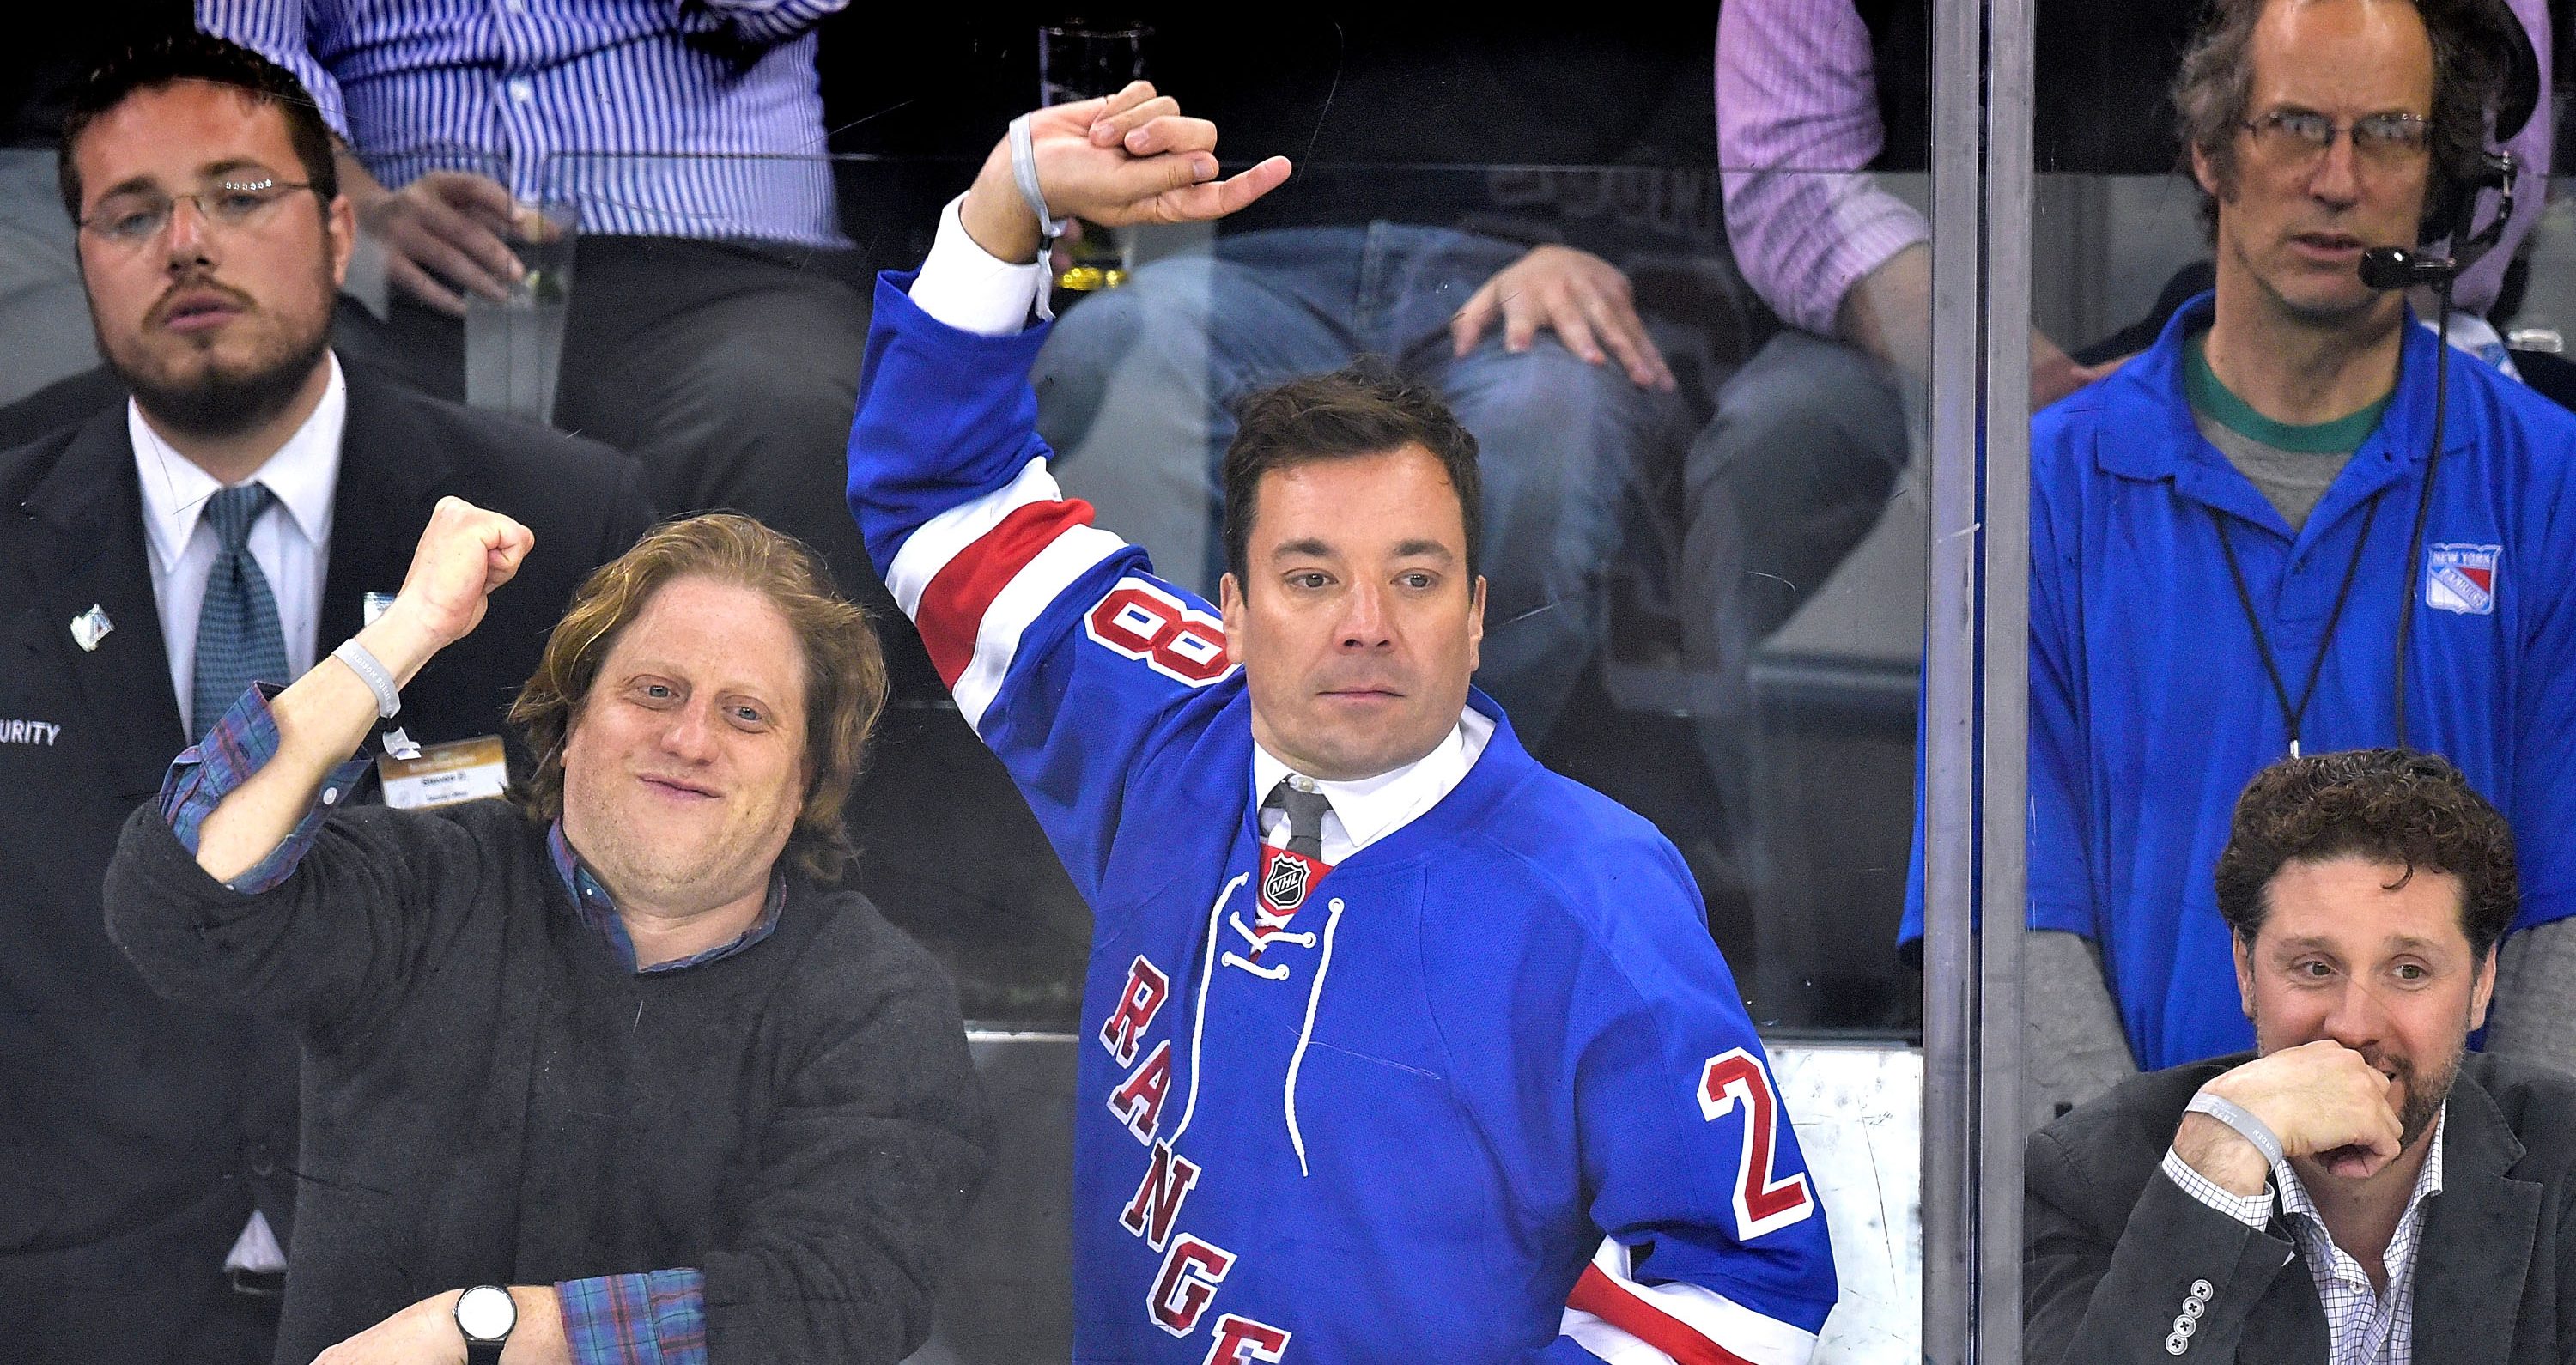 WATCH: Jimmy Fallon Hilariously Attempts to Down Beer at Rangers-Lightning – NBC New York